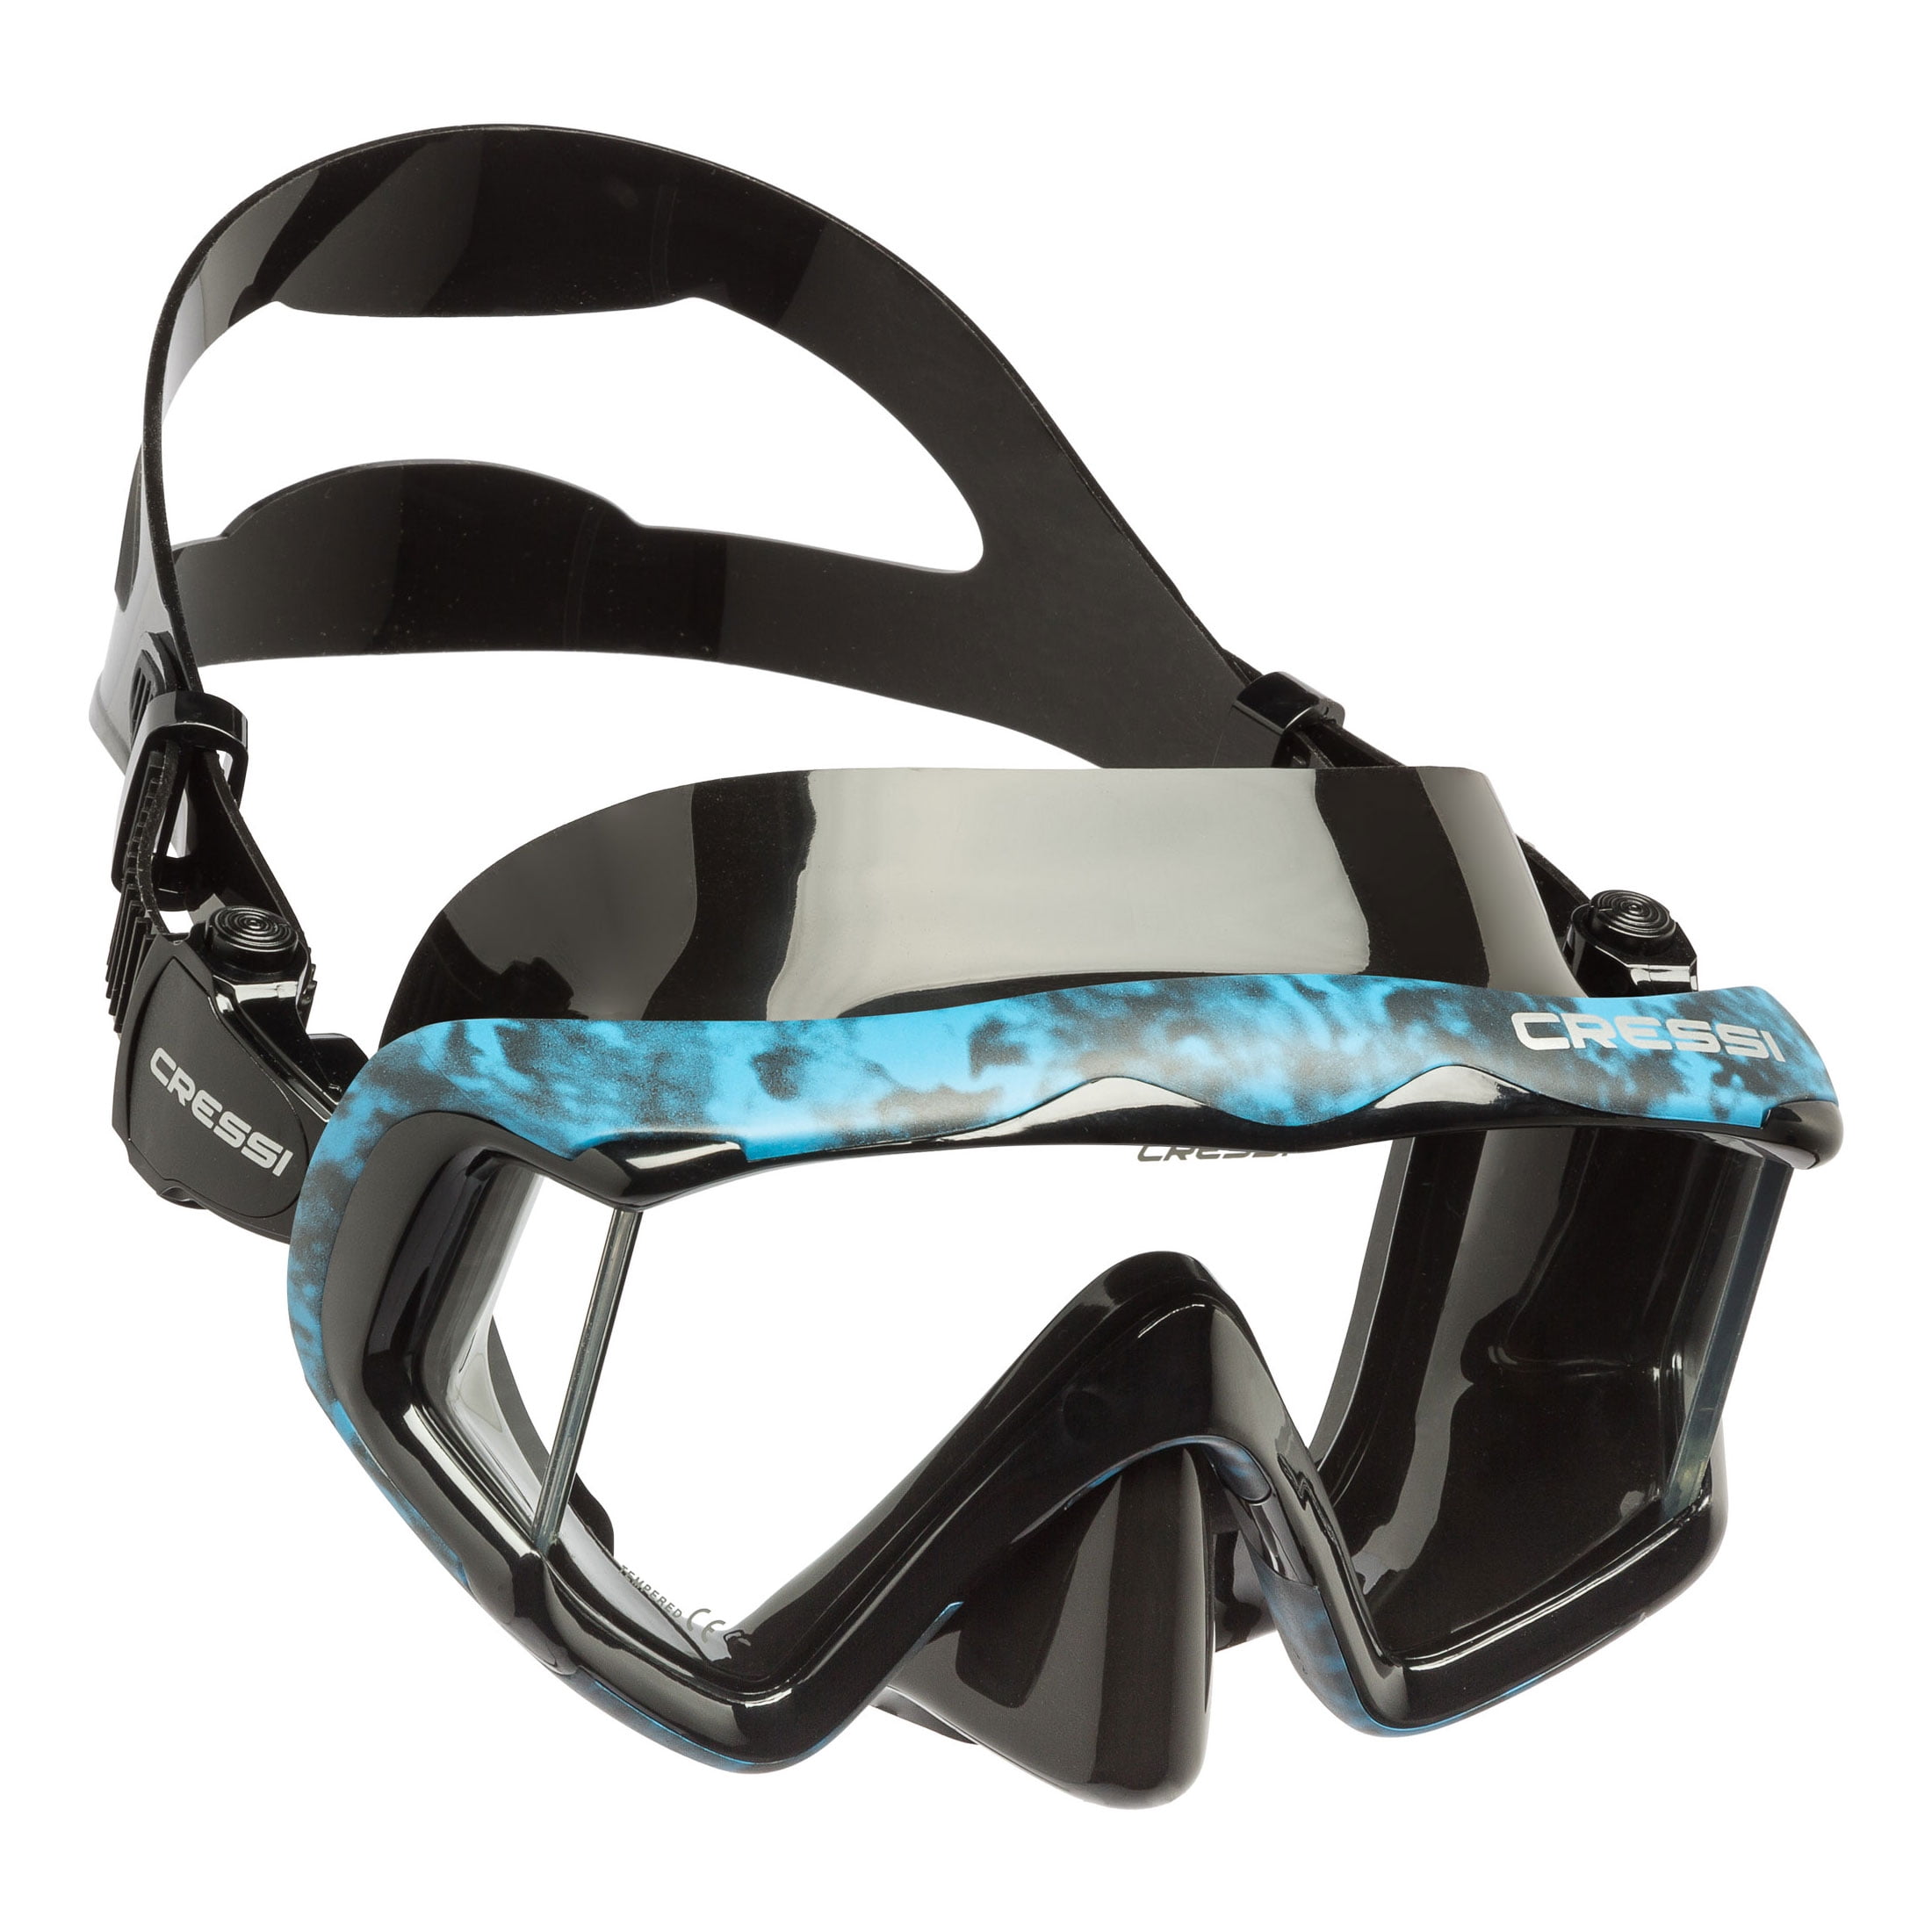 Snorkeling Mask in Pure Comfortable Silicone Available with Different Panoramic Lenses Liberty: designed in Italy Cressi Perfect View Scuba Diving 